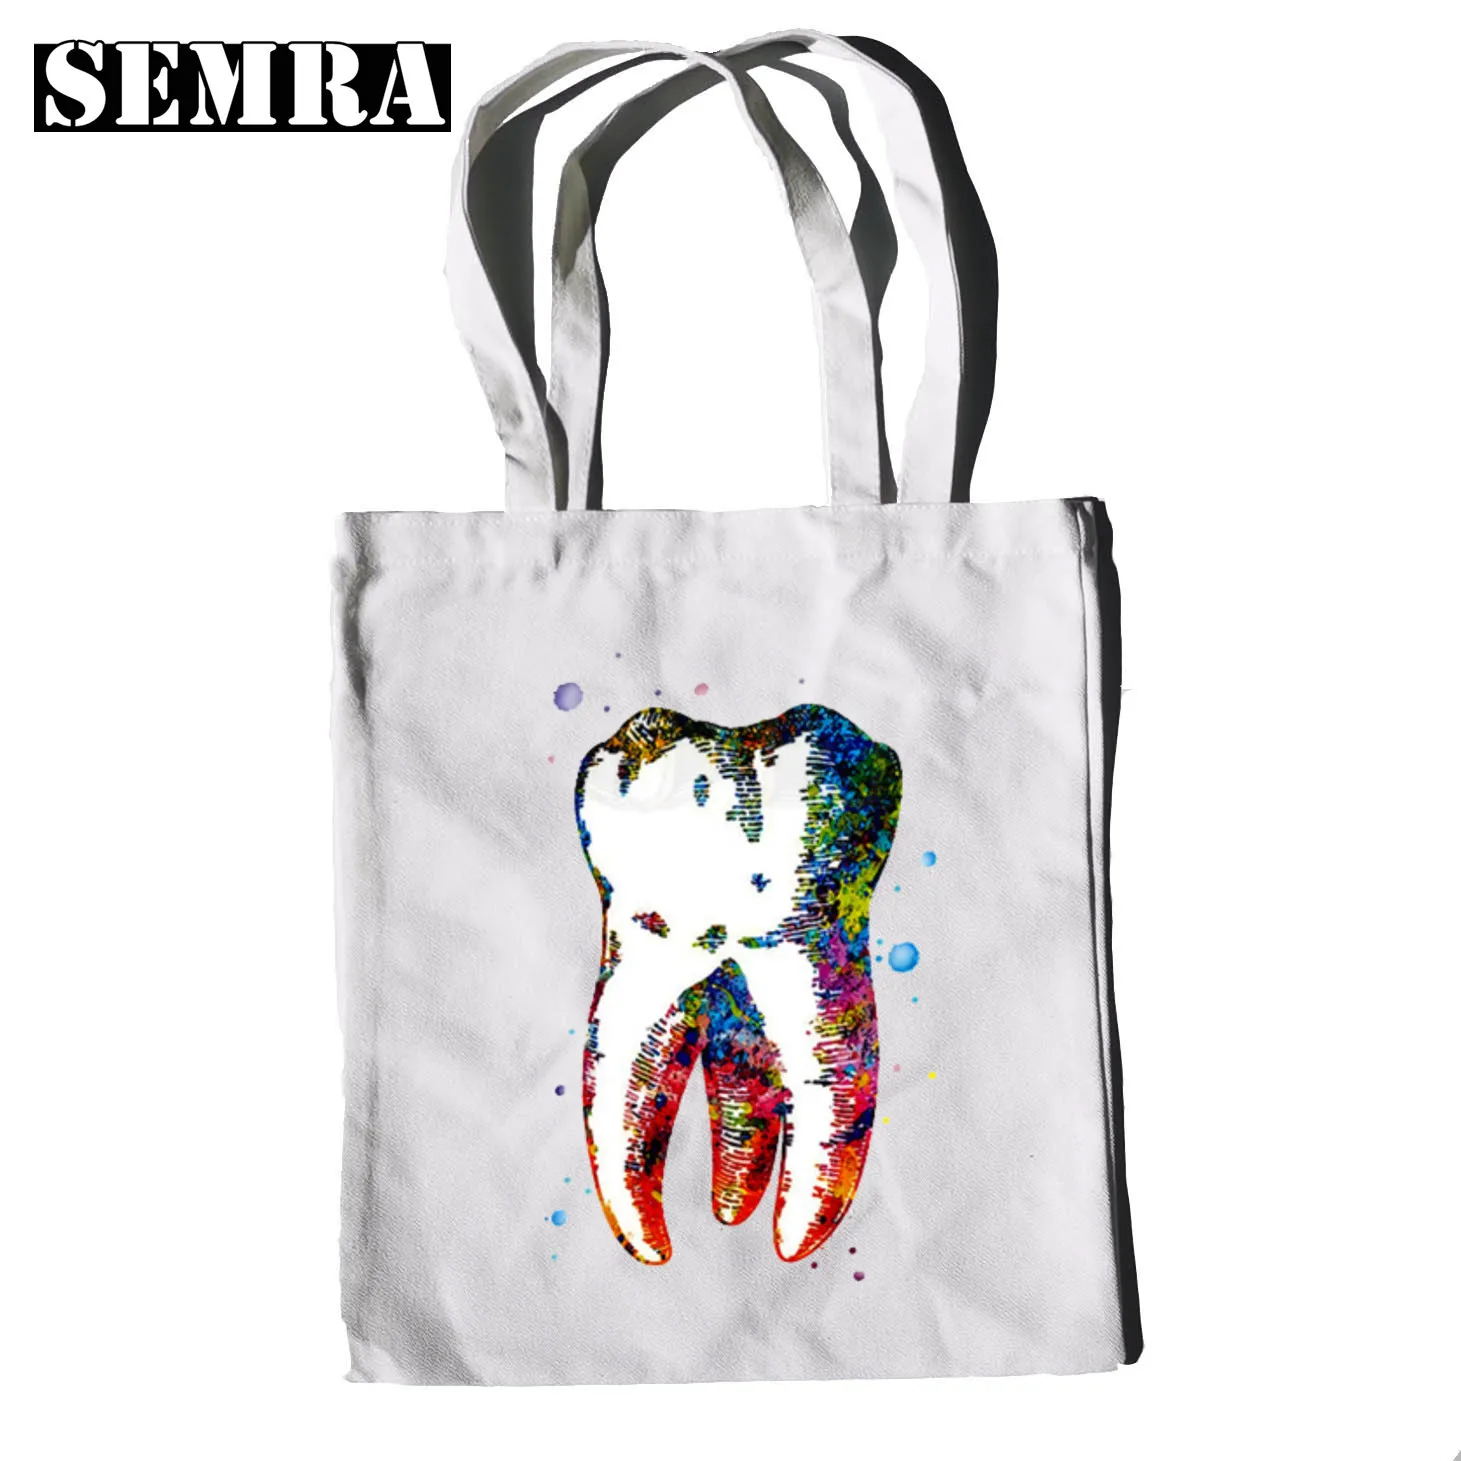 Tooth and Dentist Graphic Aesthetic Funny Fashion Black Canvas Print Shopping Bags Girls Fashion Life Casual Pacakge Hand Bag ladies shoulder bags Shoulder Bags